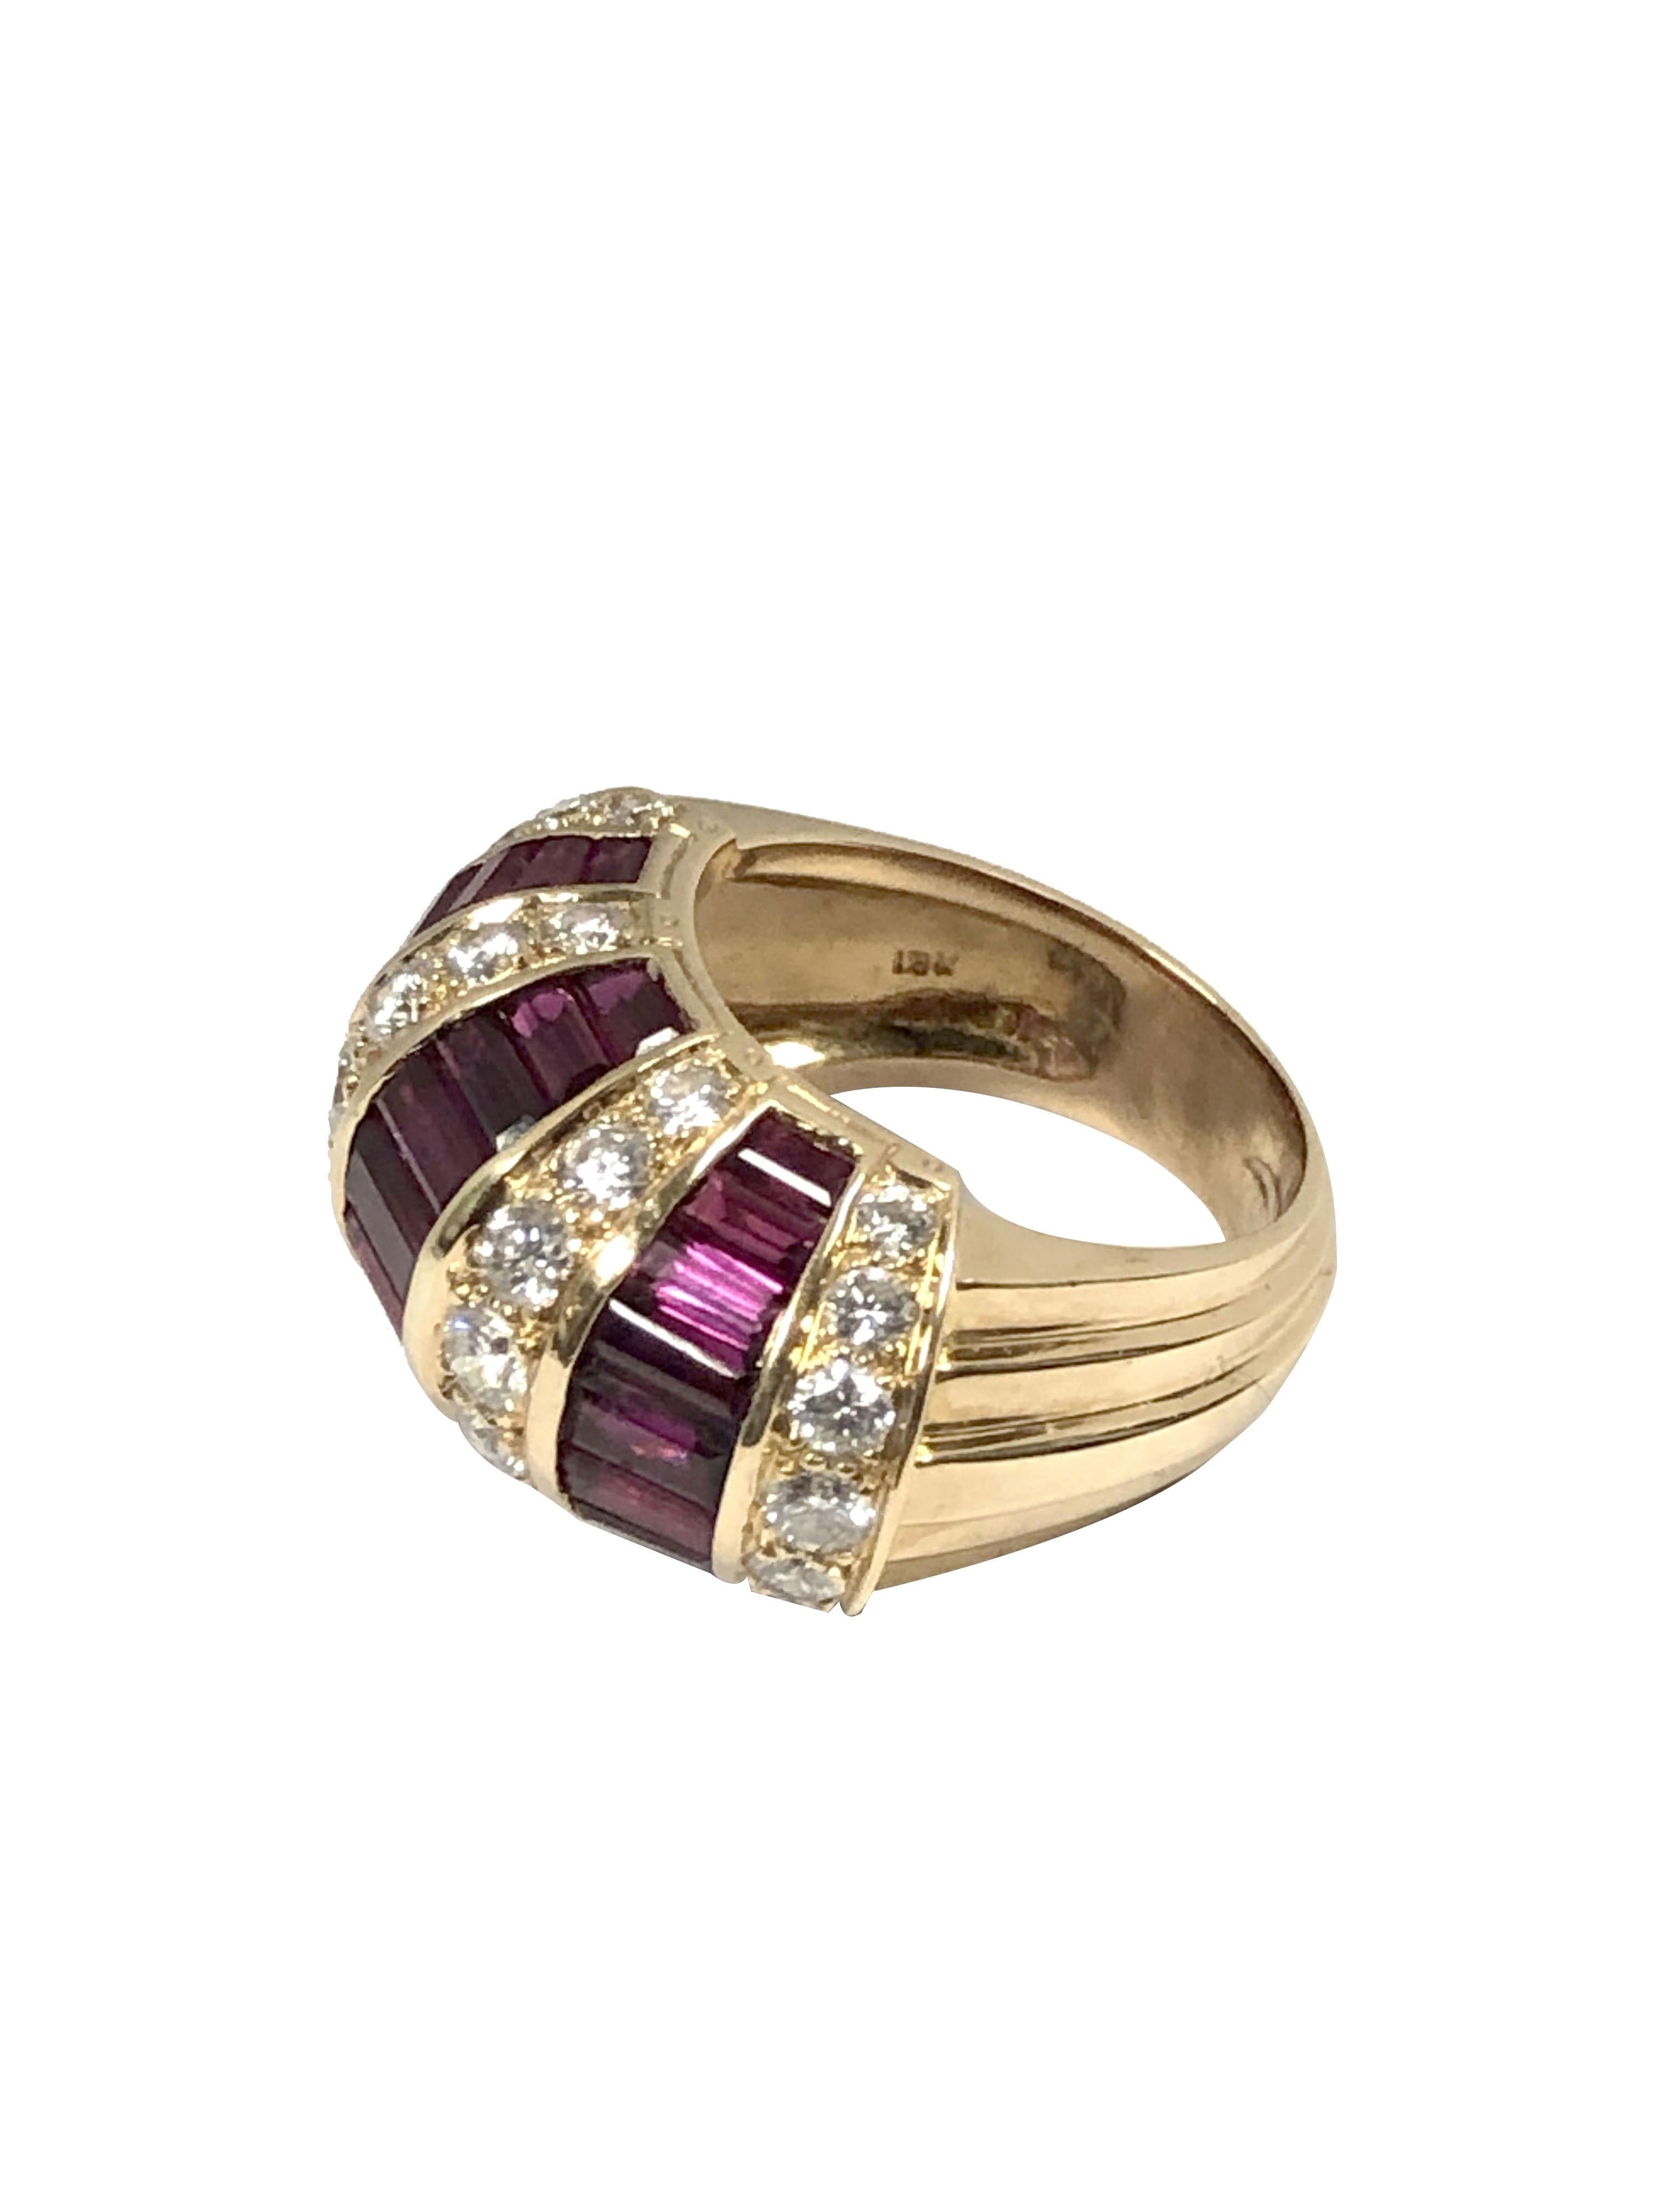 Oscar Heyman Large Yellow Gold Ruby and Diamond Cocktail Ring For Sale 2